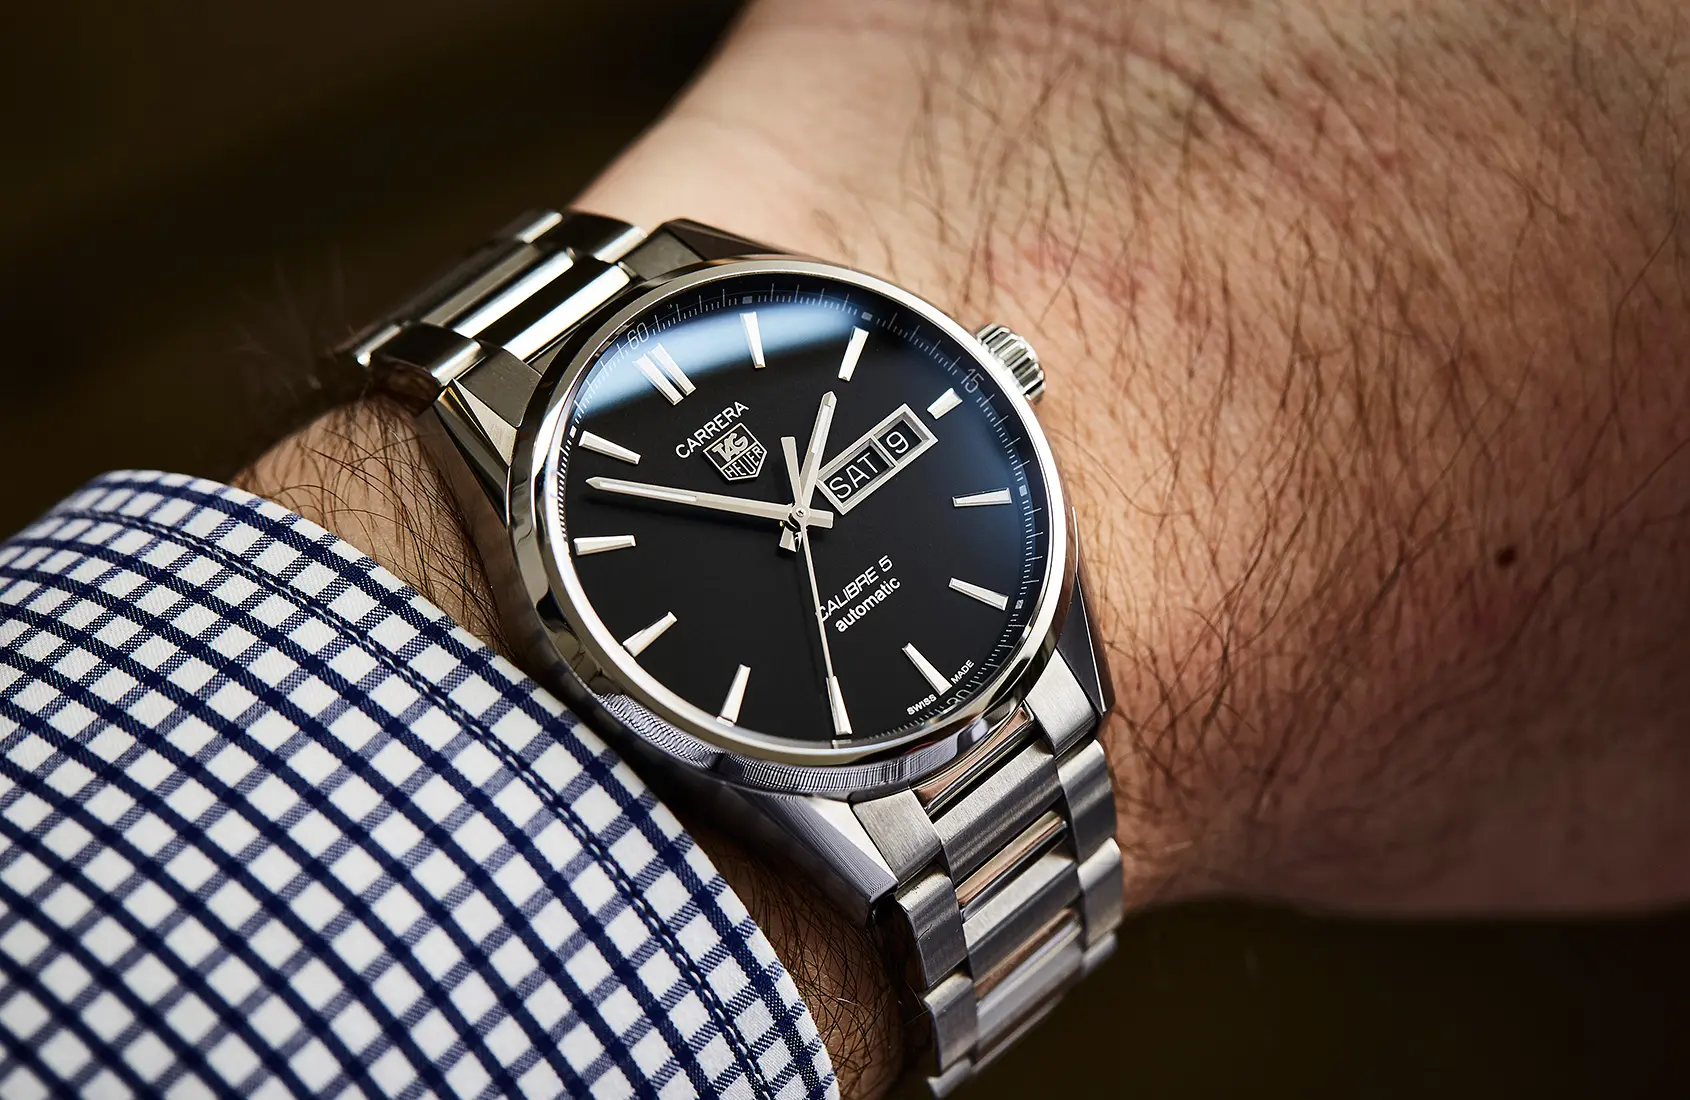 TAG Heuer Carrera Calibre 5 Day-Date review